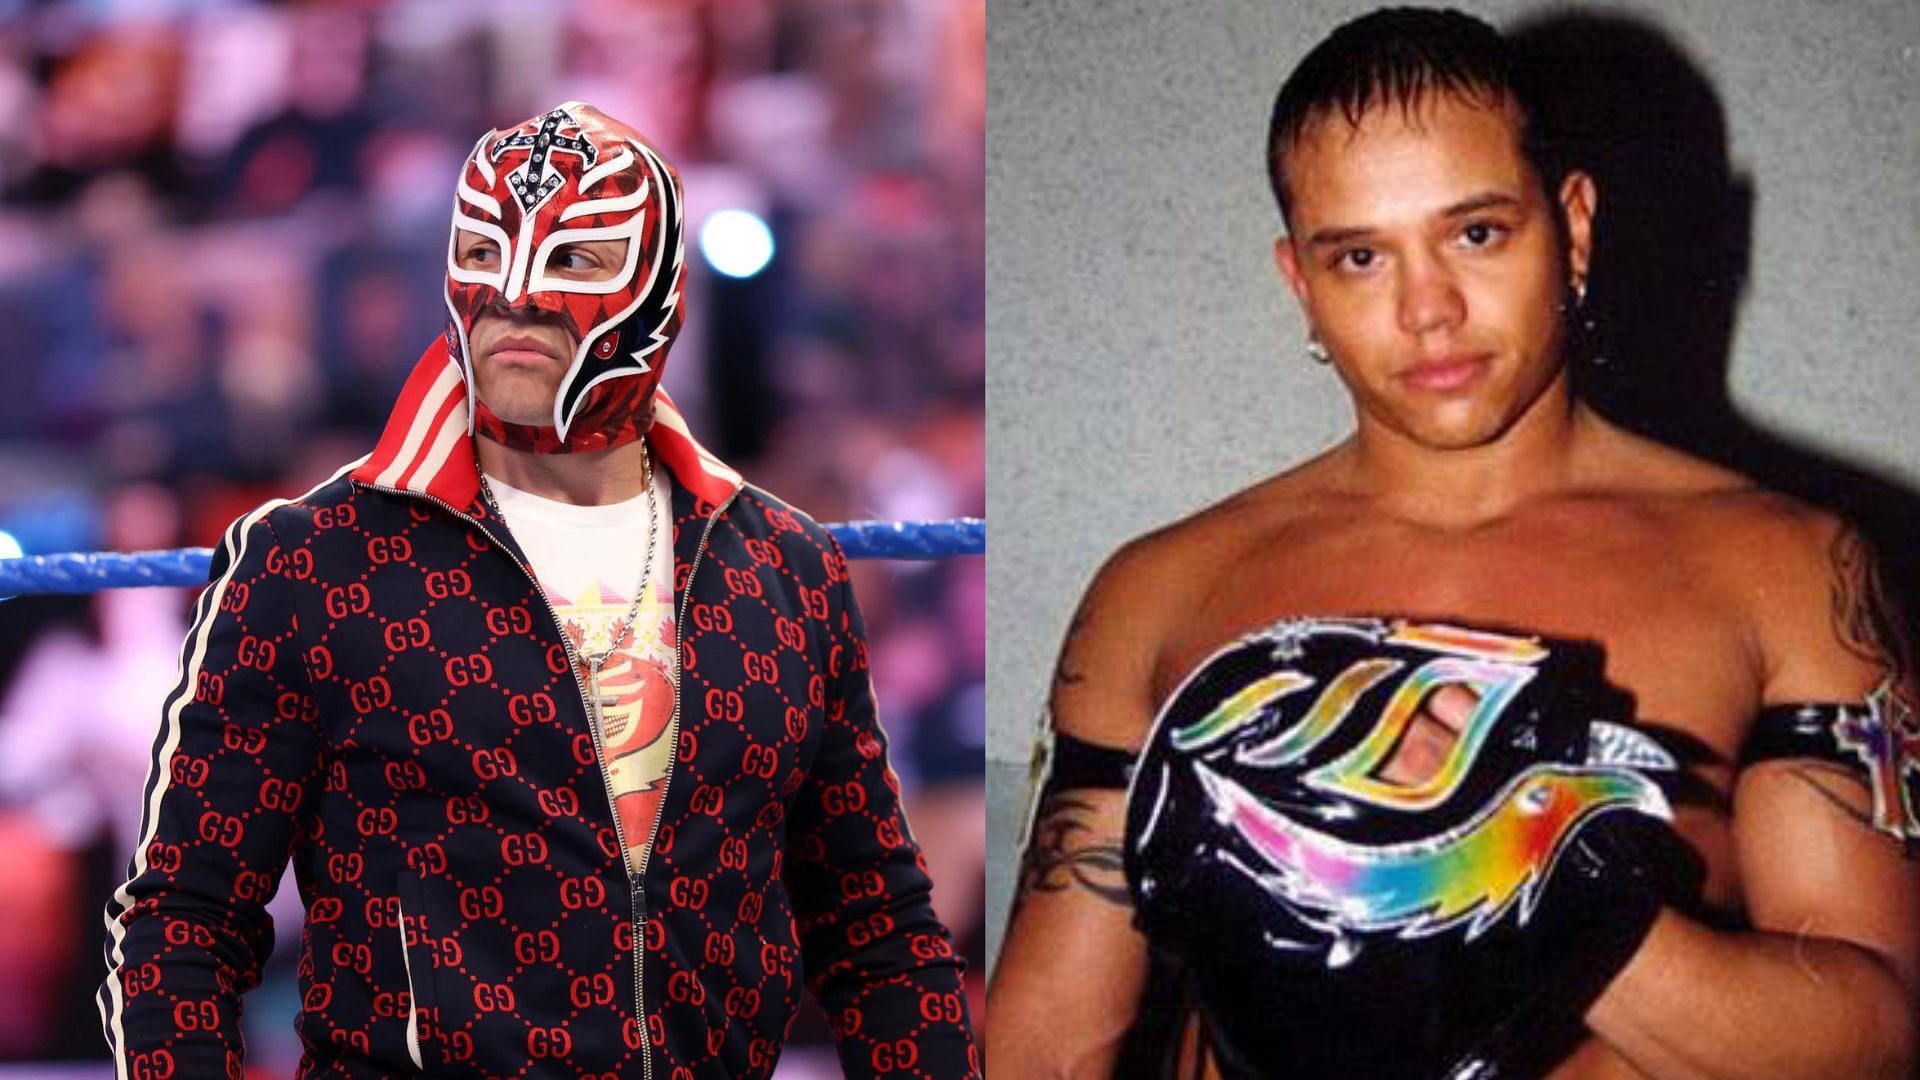 Rey Mysterio was convinced to be unmasked by a Hall of Famer